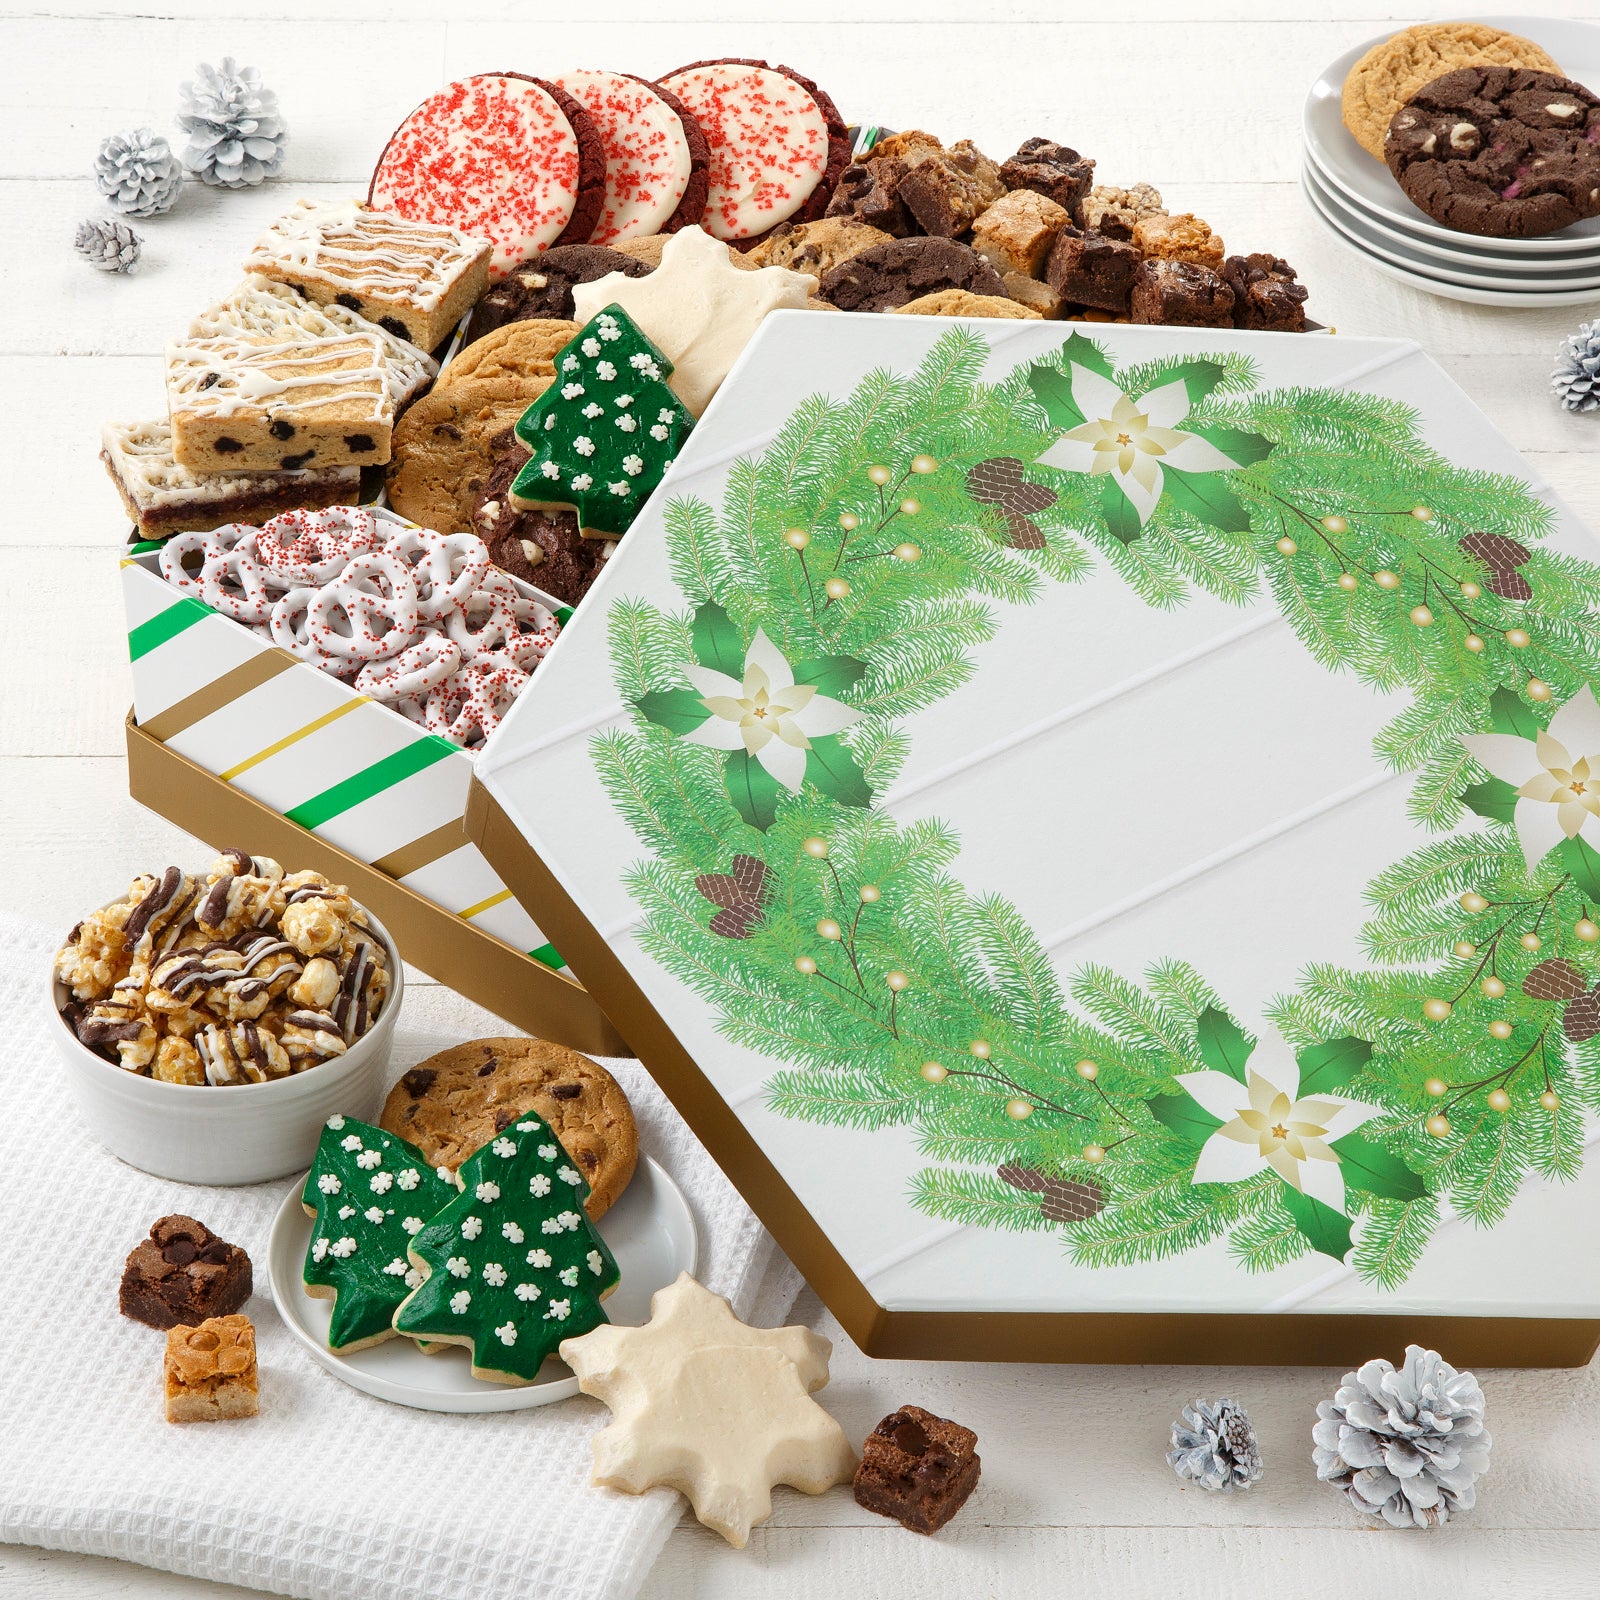 A gift box decorated with a festive wreath and filled with an assortment of holiday treats